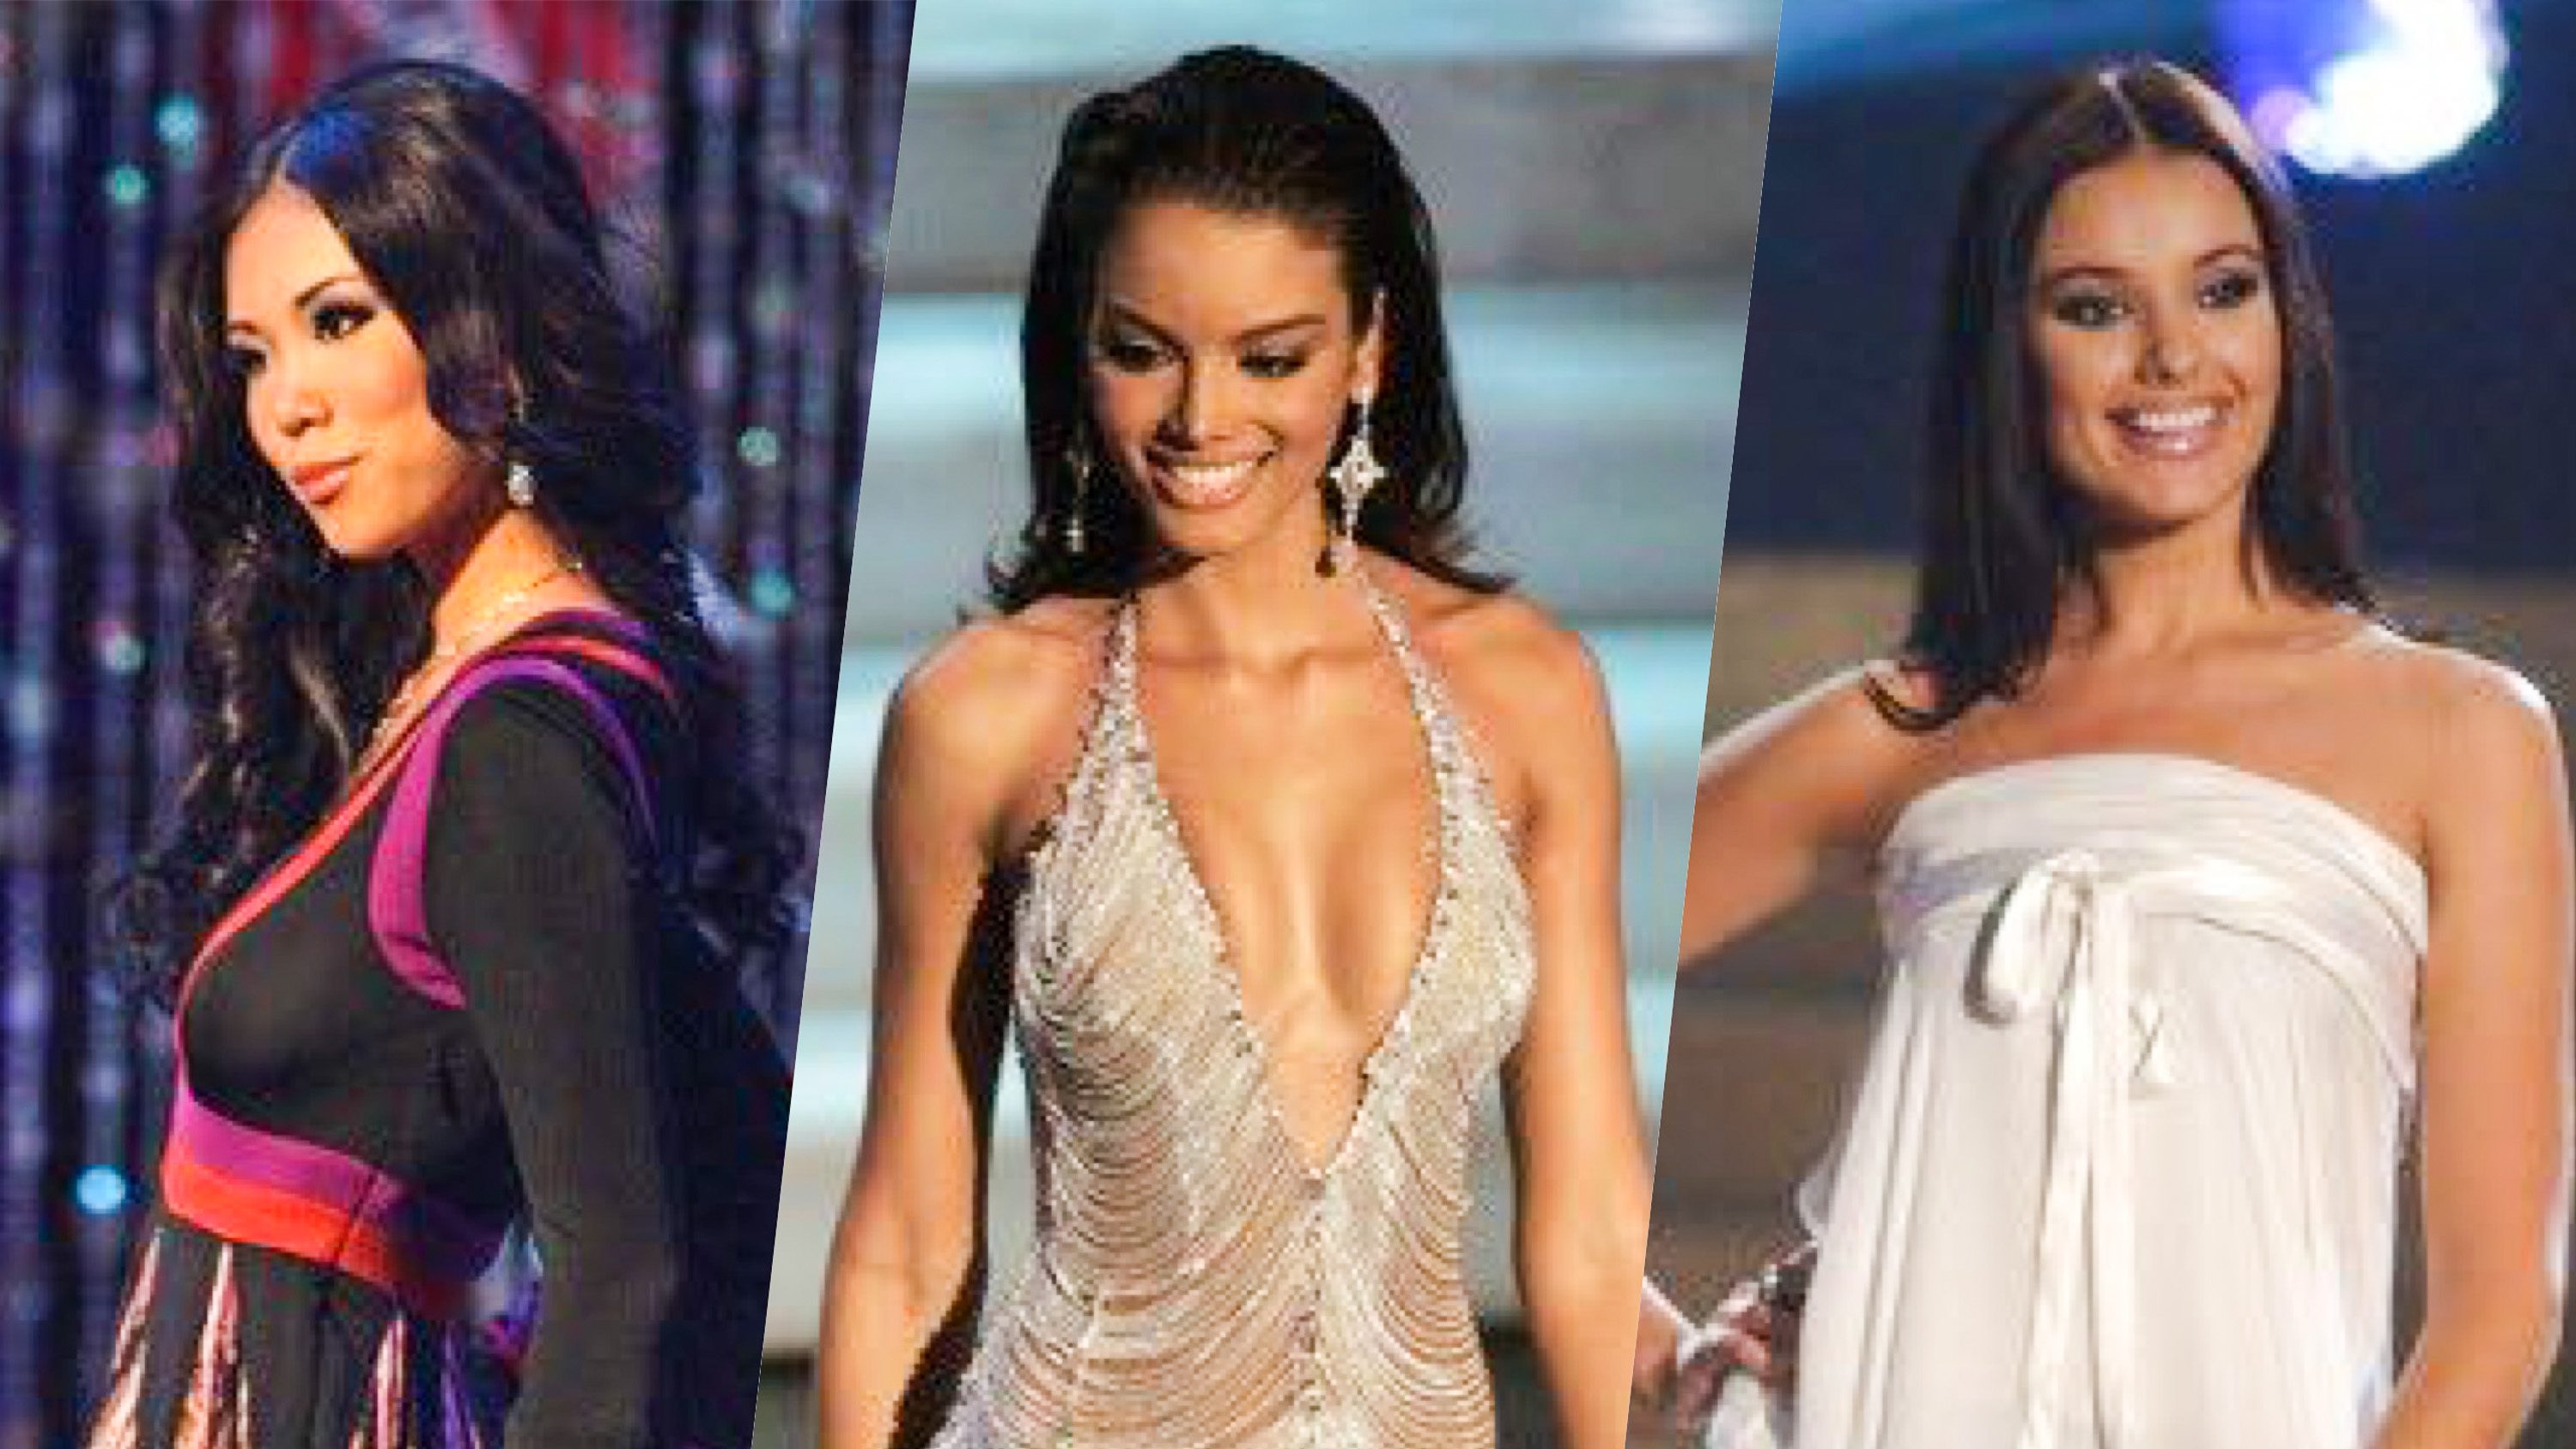 IN PHOTOS: 5 unconventional Miss Universe evening gowns